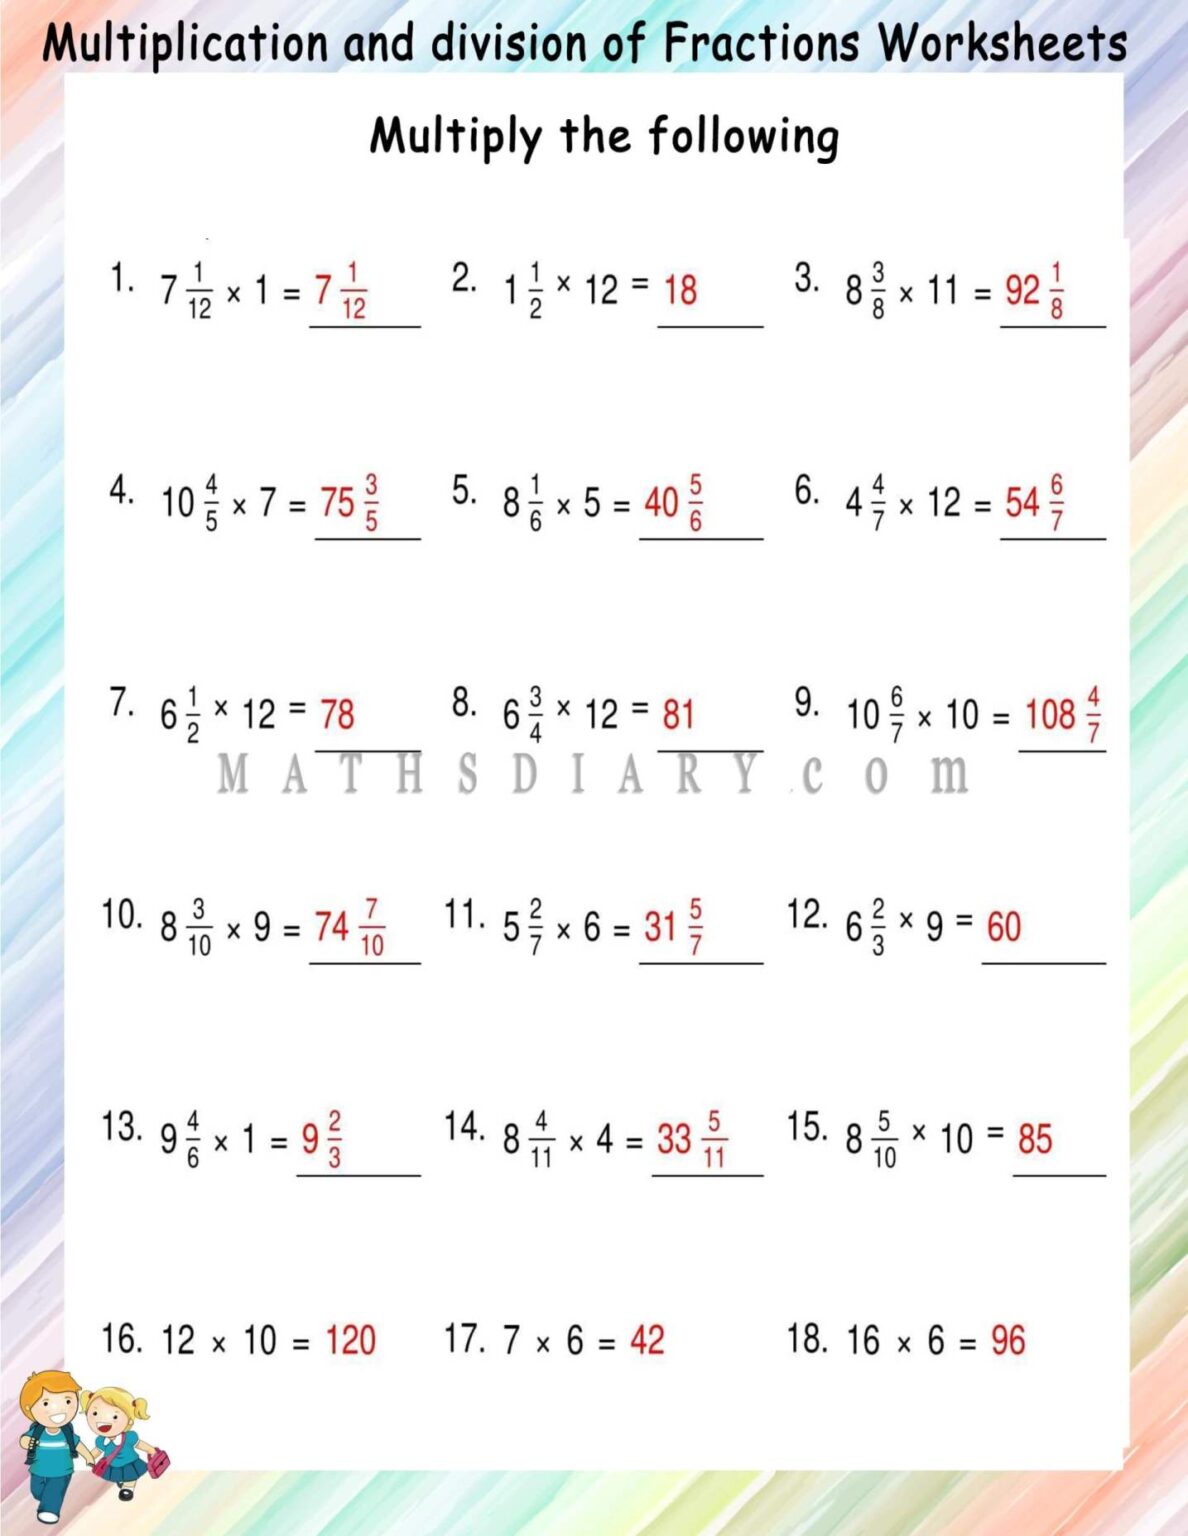 the-simplify-proper-fractions-to-lowest-terms-easier-version-a-math-worksheet-from-the